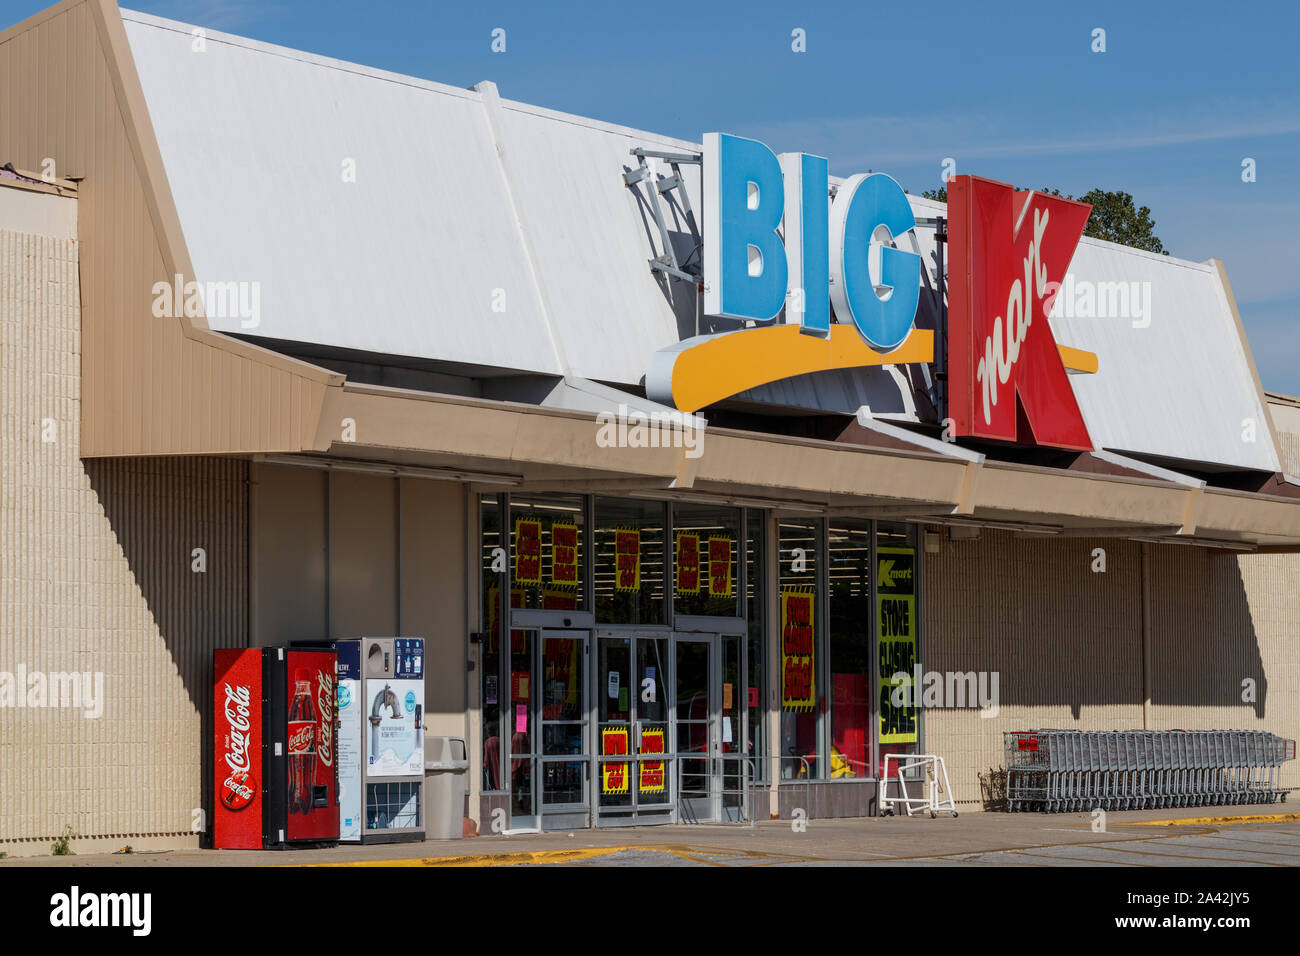 Kokomo - Circa September 2019: KMart closing and going out of business. Sears Holdings filed for bankruptcy and is closing many KMart locations Stock Photo